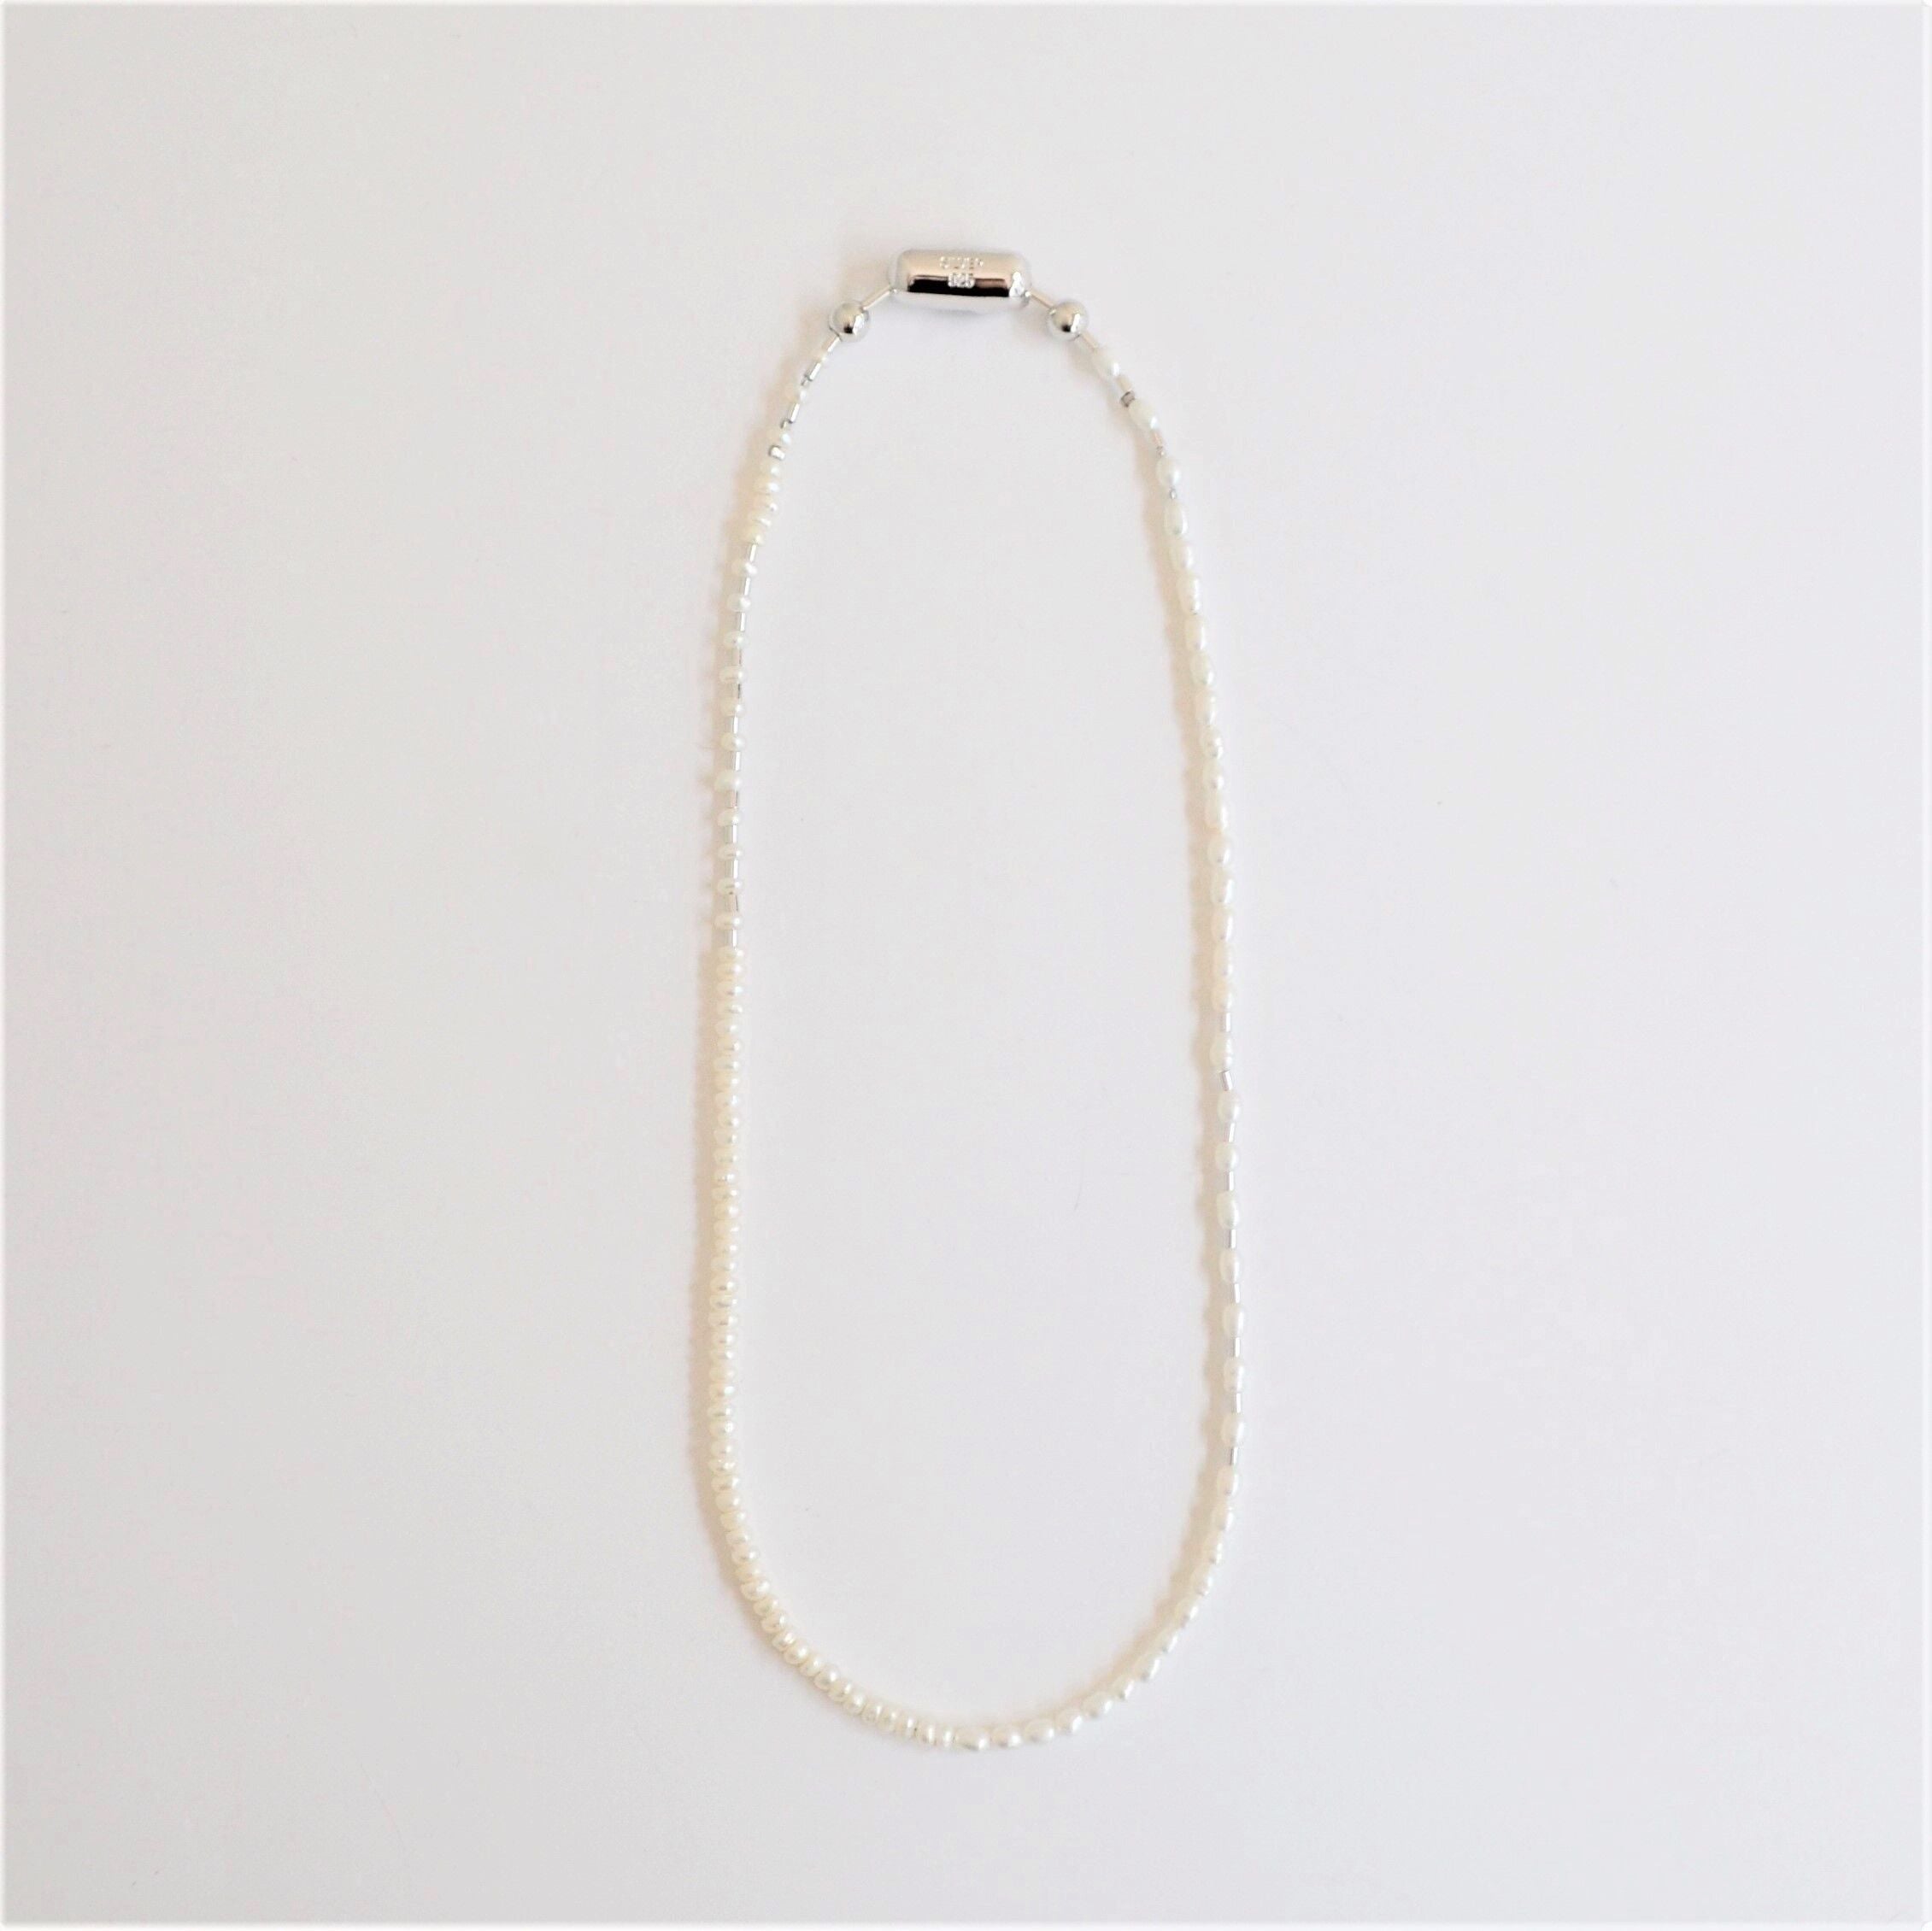 Necklace – MAYU online store